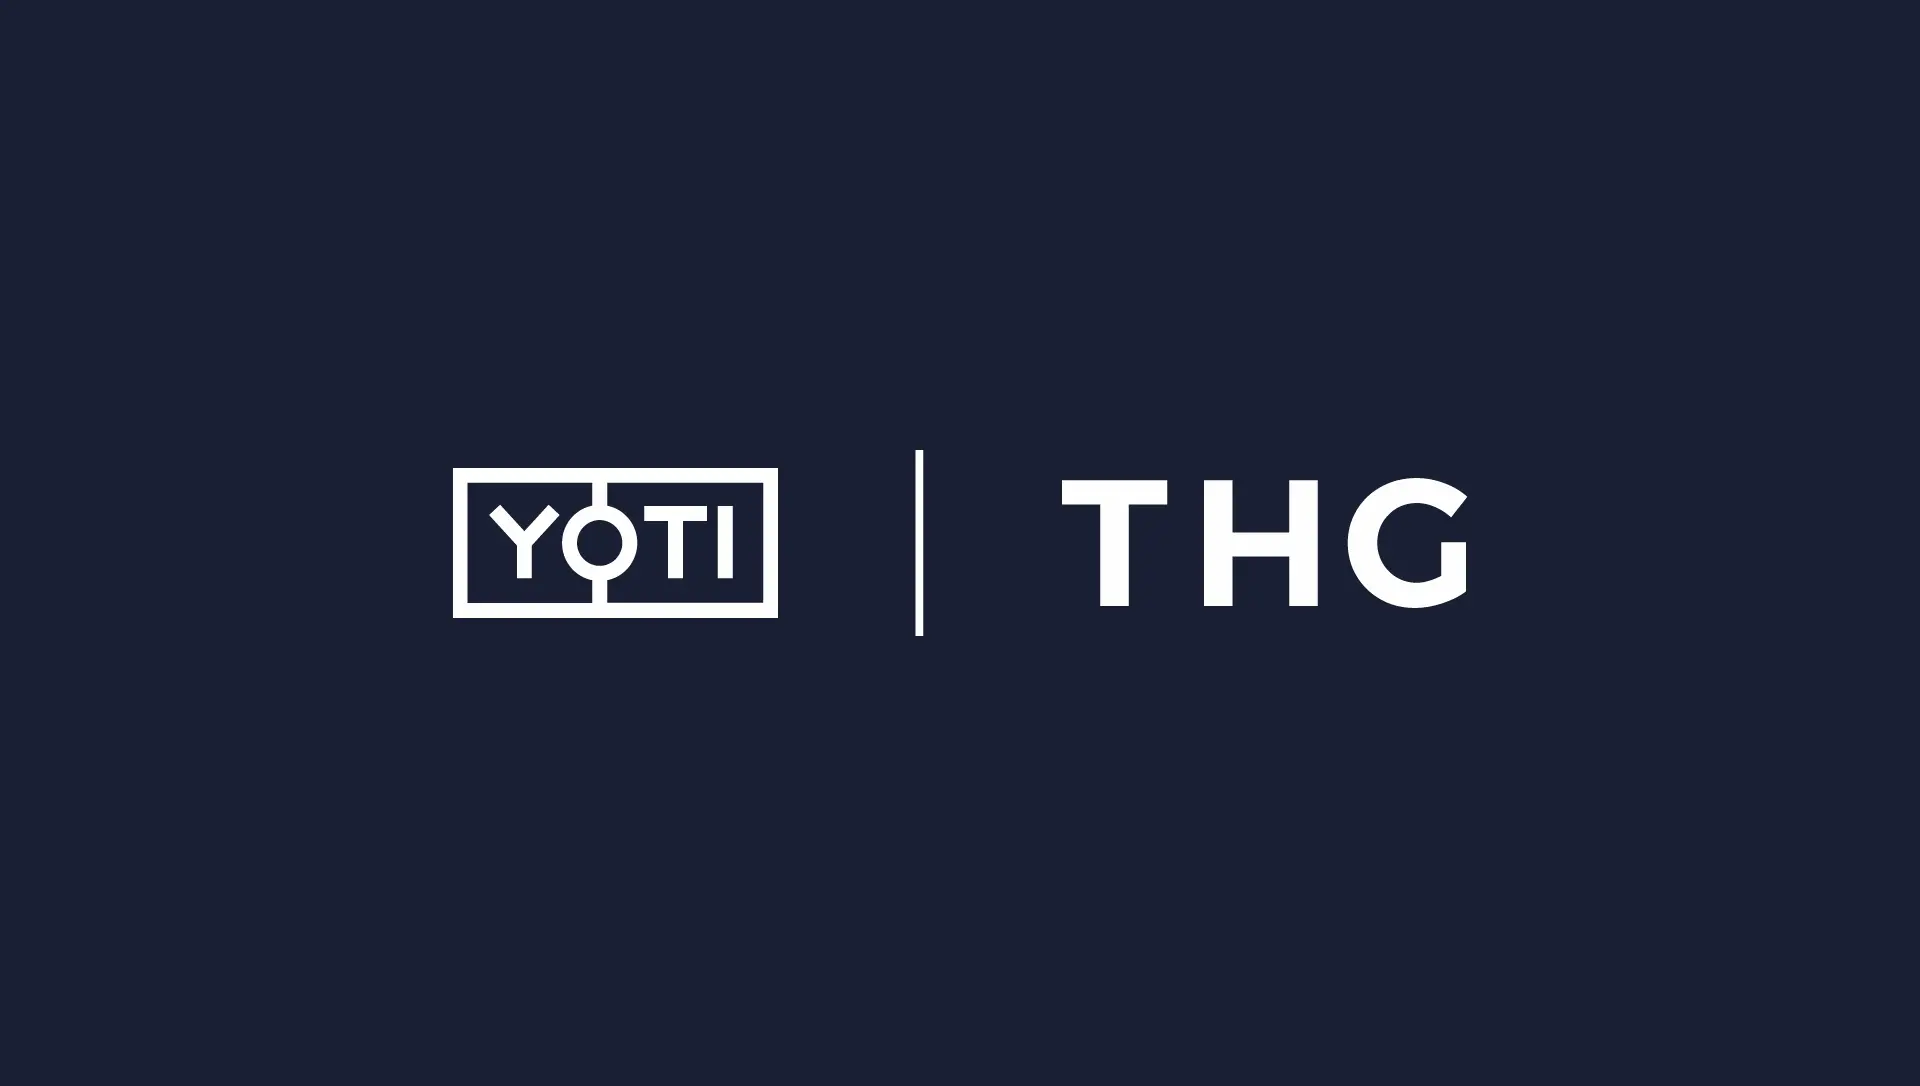 Yoti and THG logos presented together